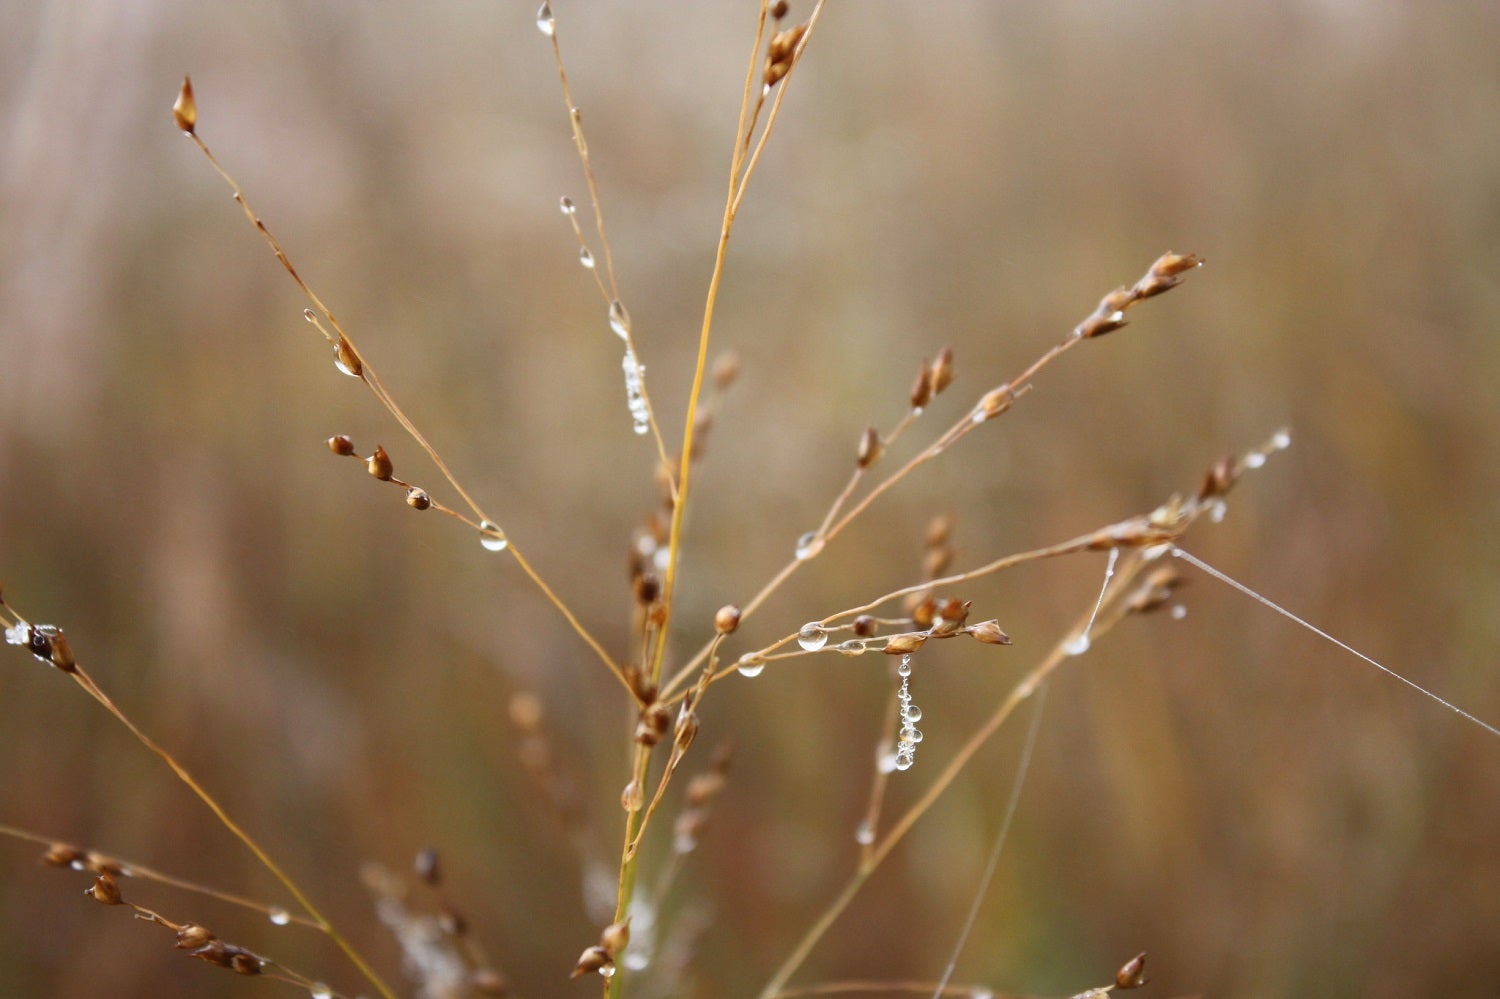 Switchgrass closeup with icy droplets